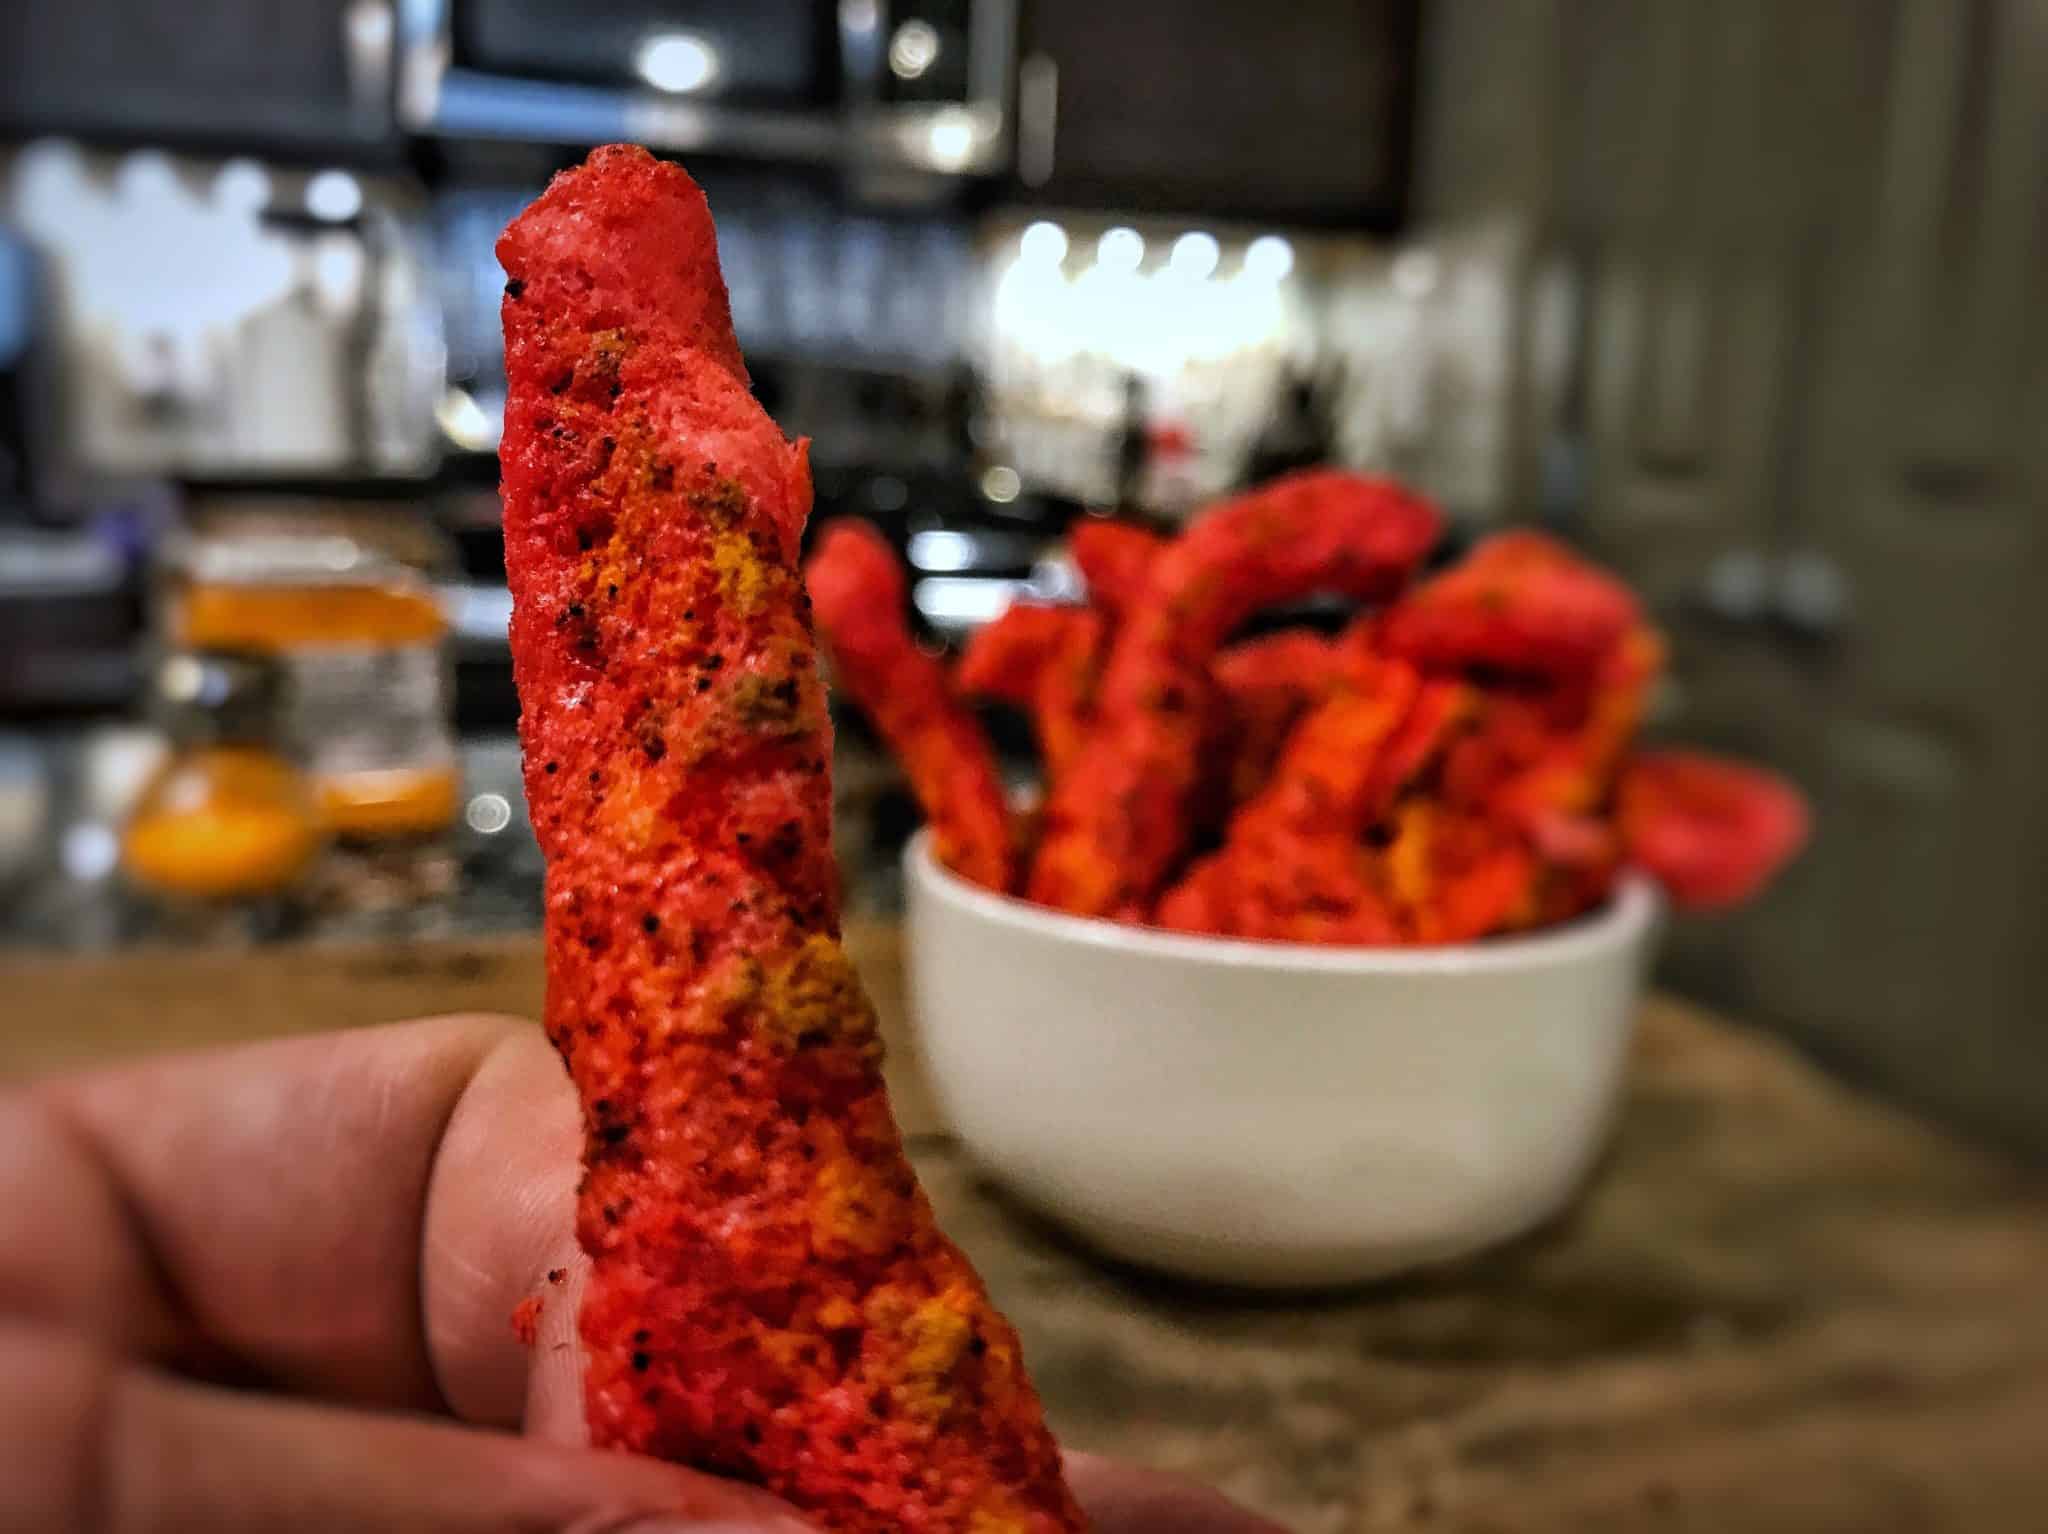 Food Product of the Week! Chester's Flamin' Hot Fries